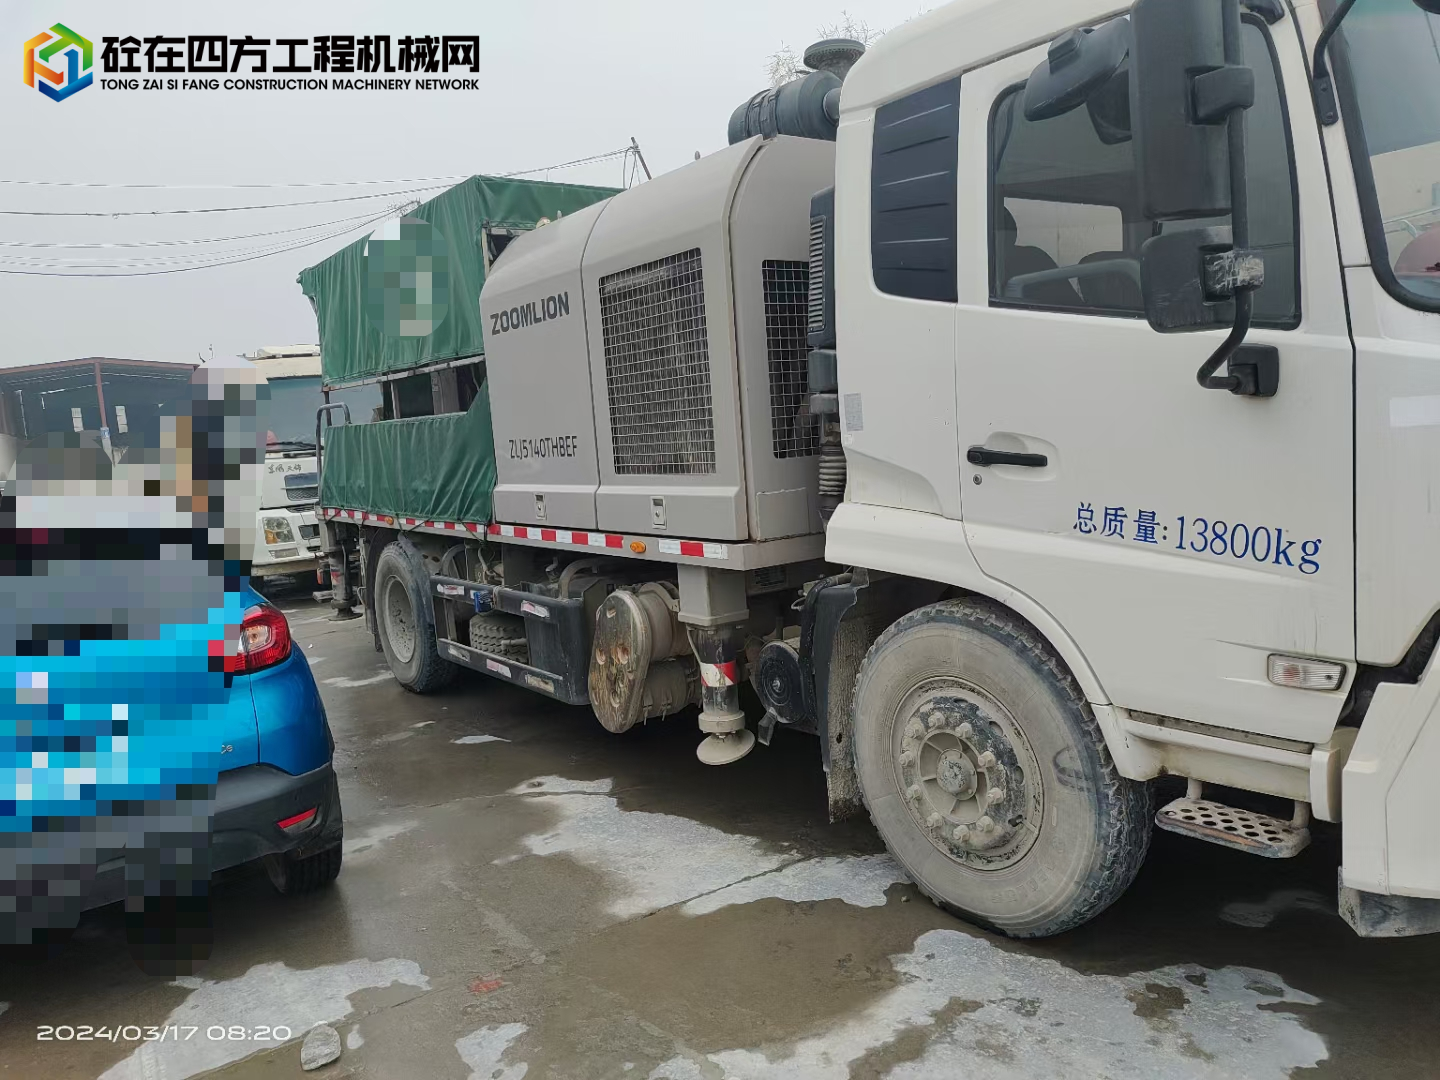 https://images.tongzsf.com/tong/truck_machine/20240317/165f6a10a3ce34.jpg